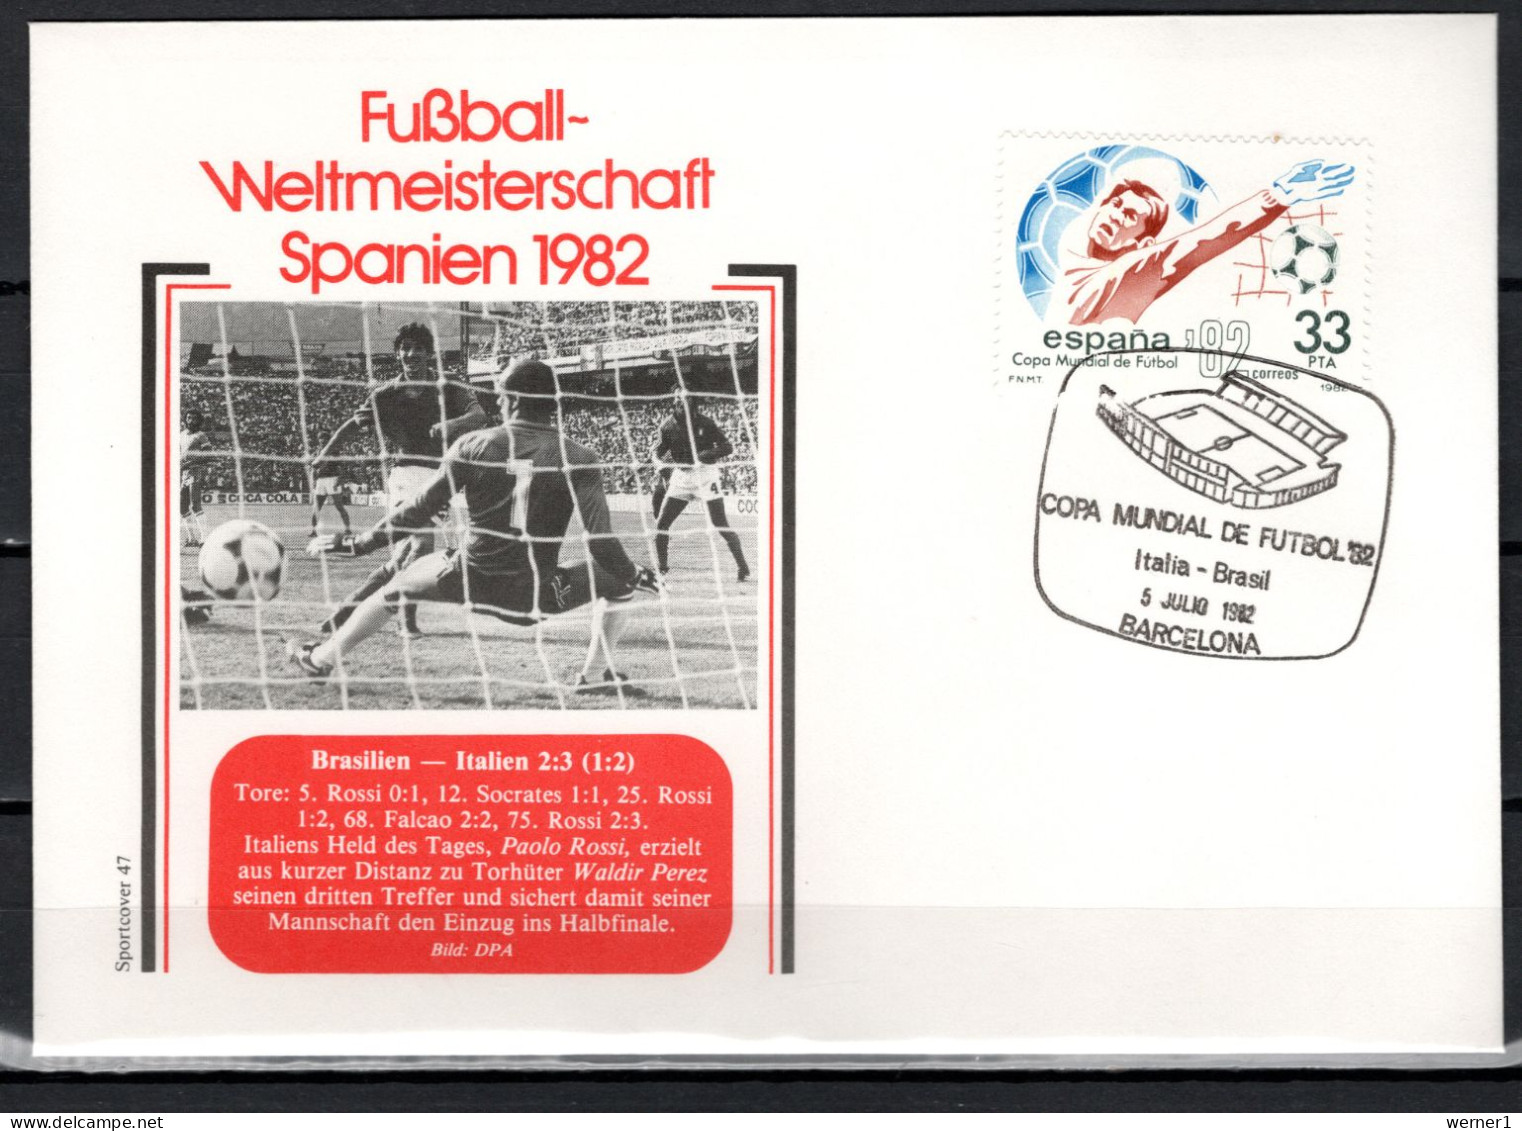 Spain 1982 Football Soccer World Cup Commemorative Cover Match Brazil - Italy 2:3 - 1982 – Spain